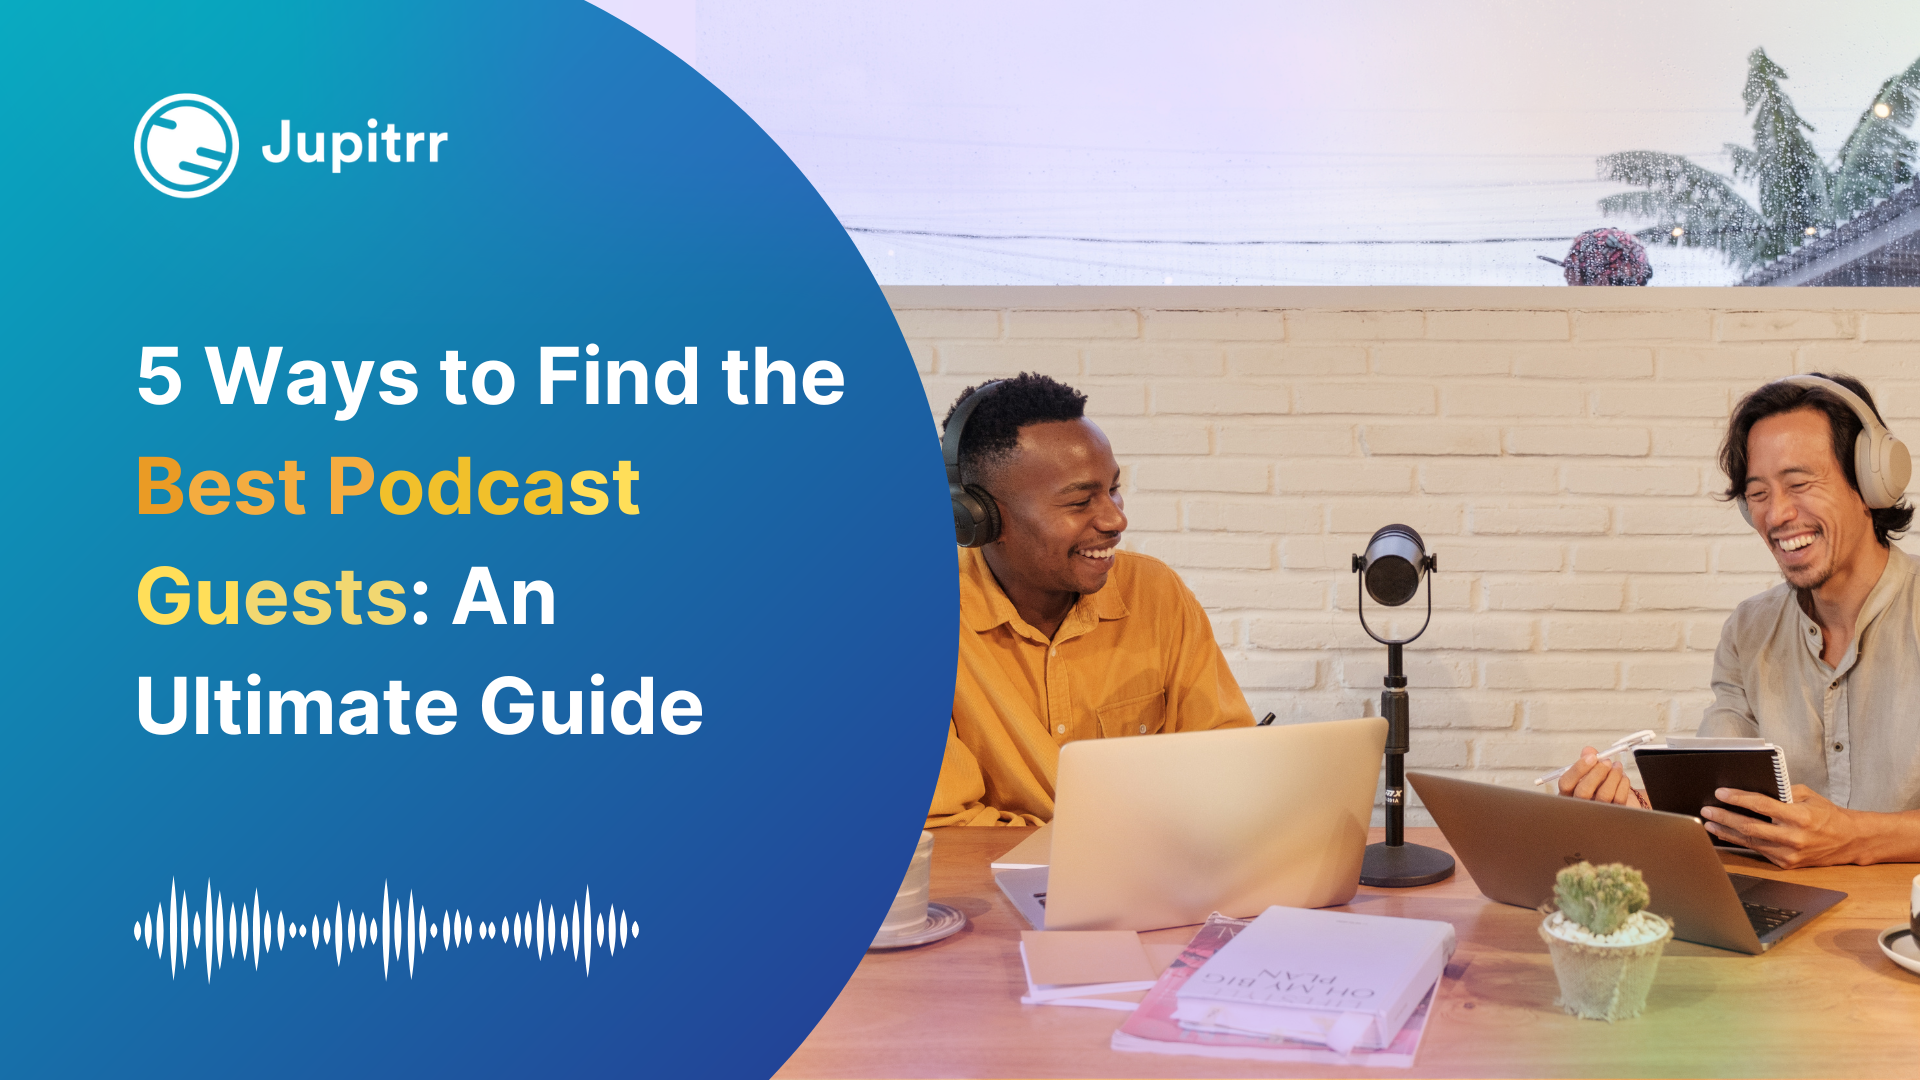 5 Ways to Find the Best Podcast Guests: An Ultimate Guide